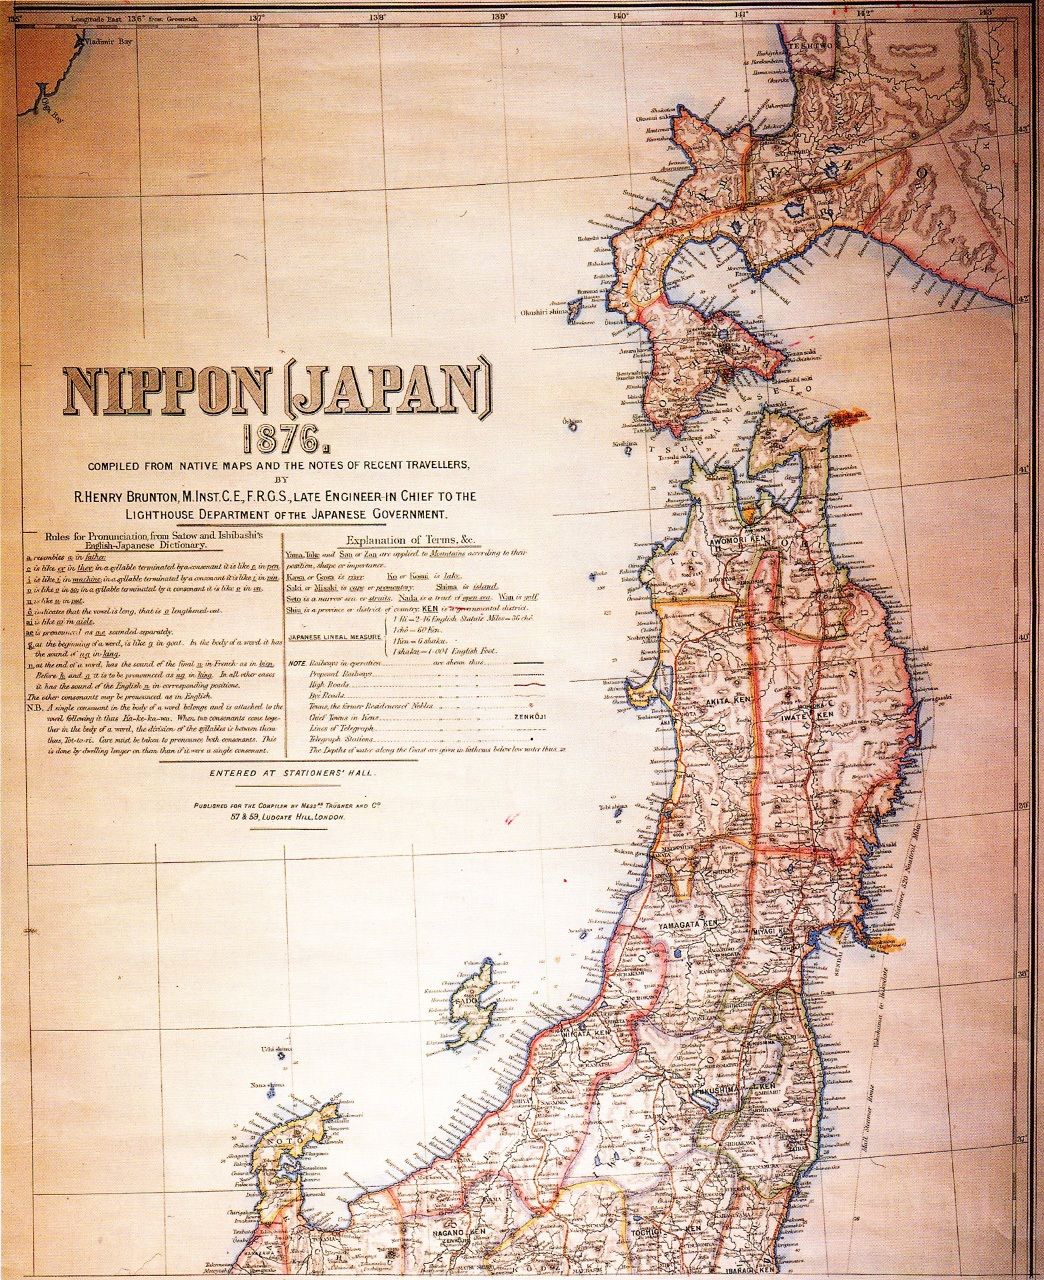 Brunton’s Map of Japan, carried by Bird on her travels. (Courtesy of author)